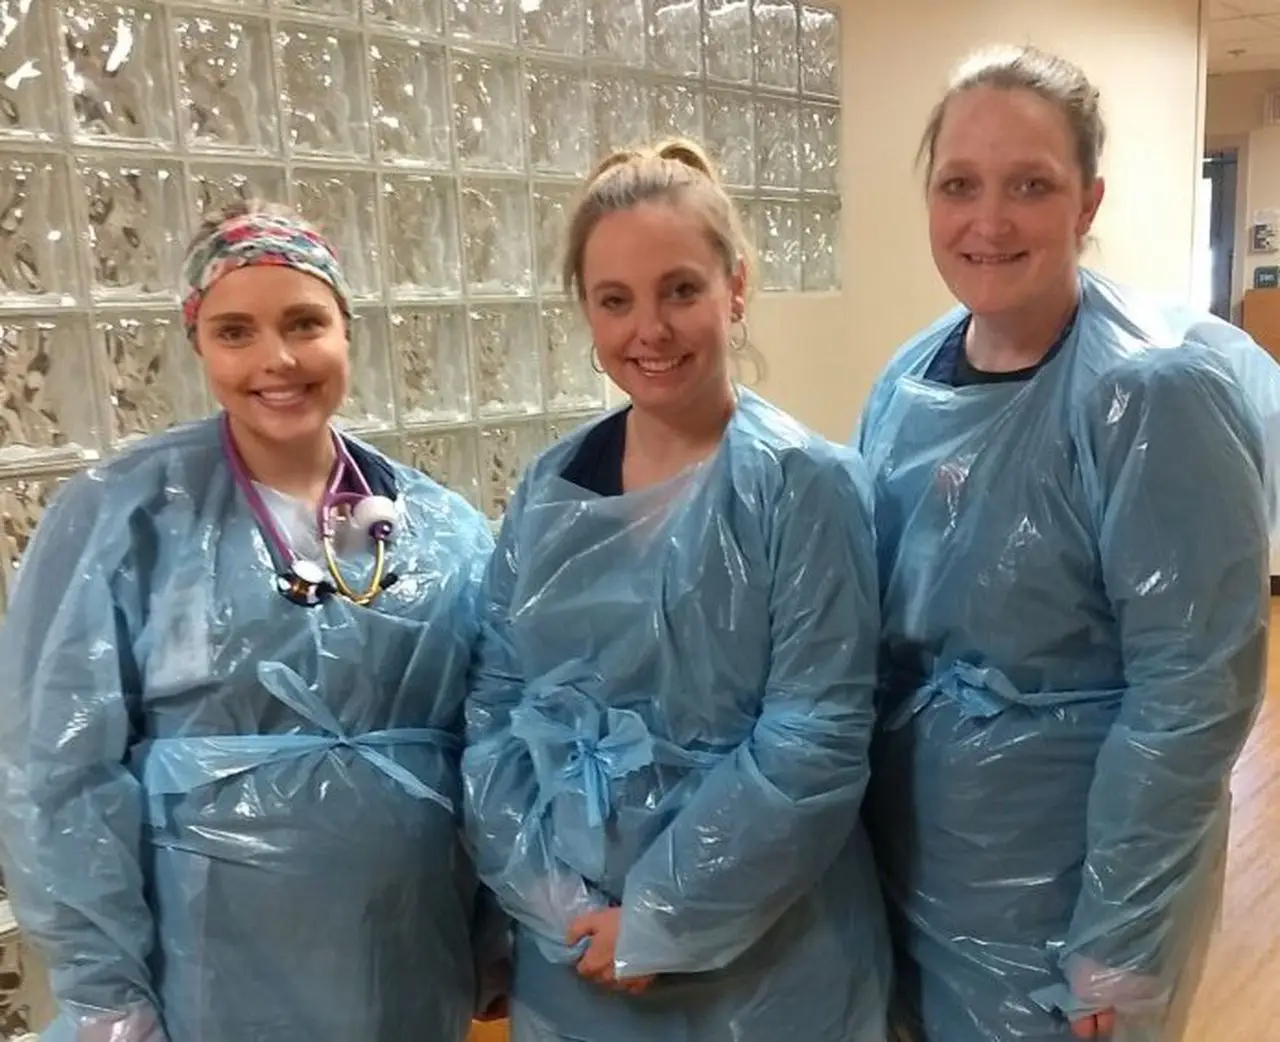 Essential workers wear plastic medical gowns